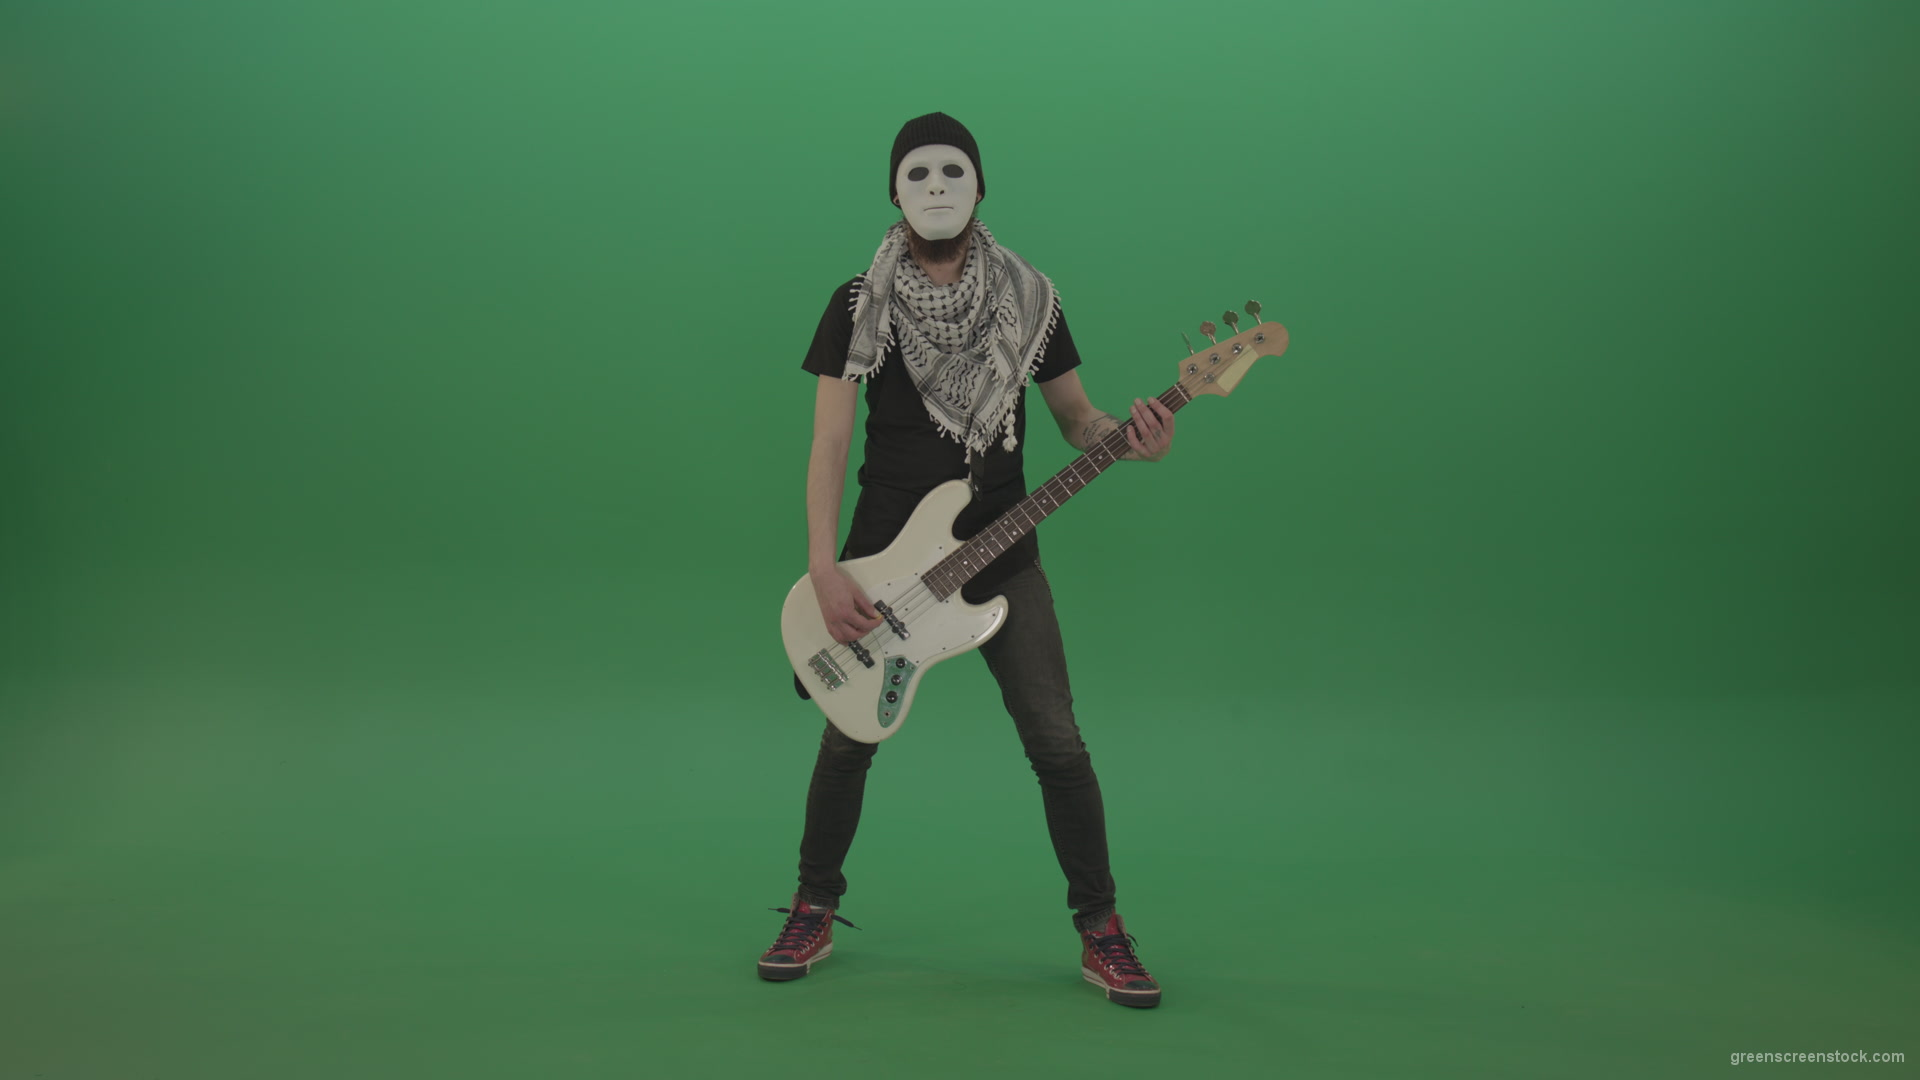 Bass-guitaris-in-full-size-play-white-guitar-in-white-mask-on-chromakey-green-screen_001 Green Screen Stock